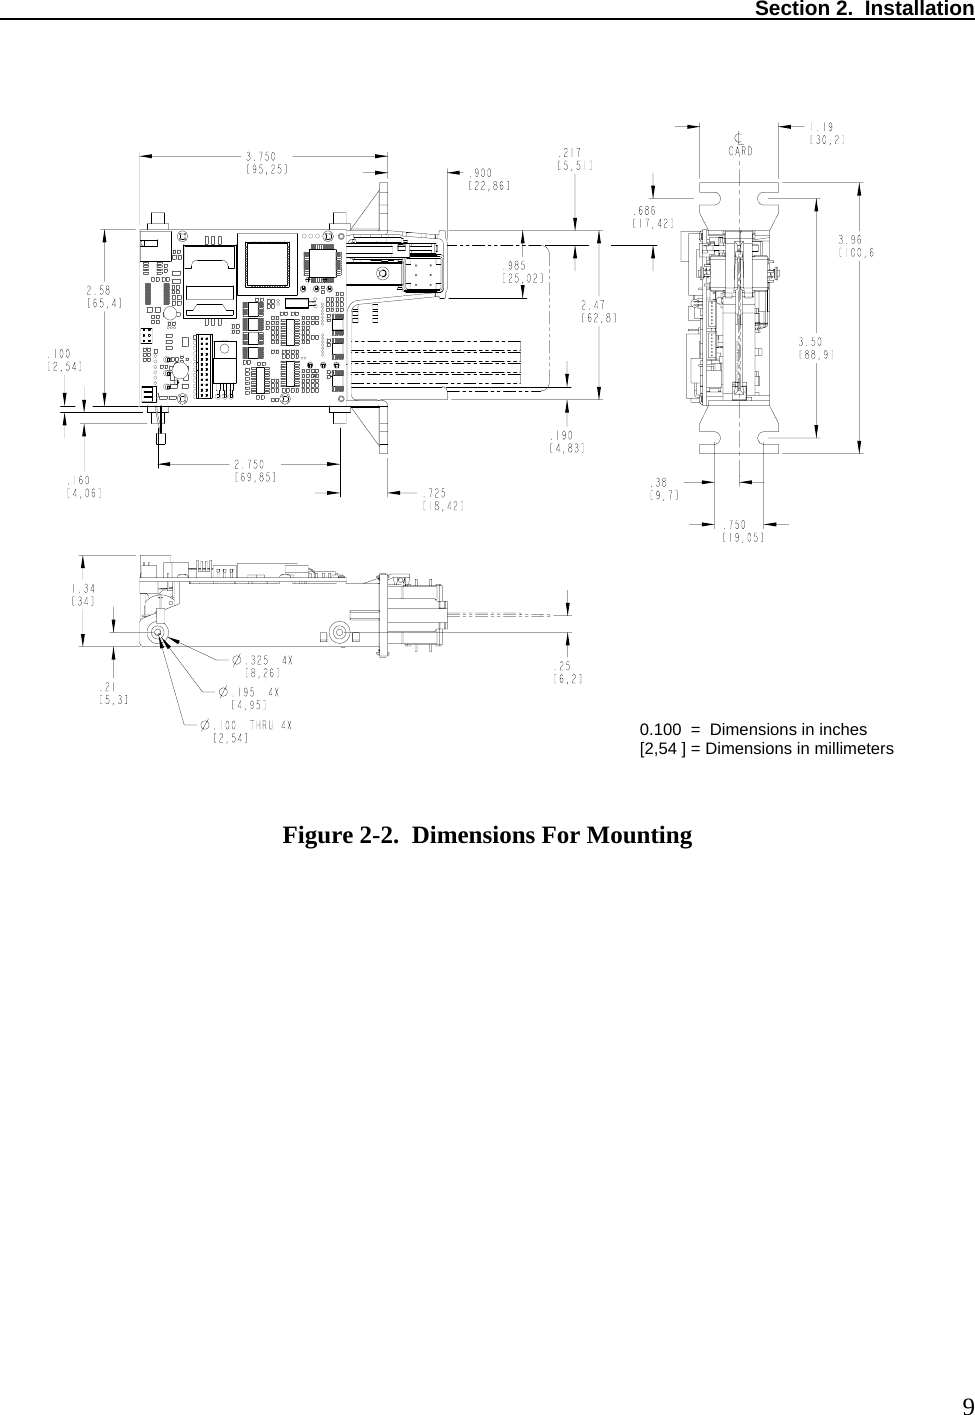  Section 2.  Installation   9 0.100  =  Dimensions in inches [2,54 ] = Dimensions in millimeters                           Figure 2-2.  Dimensions For Mounting 